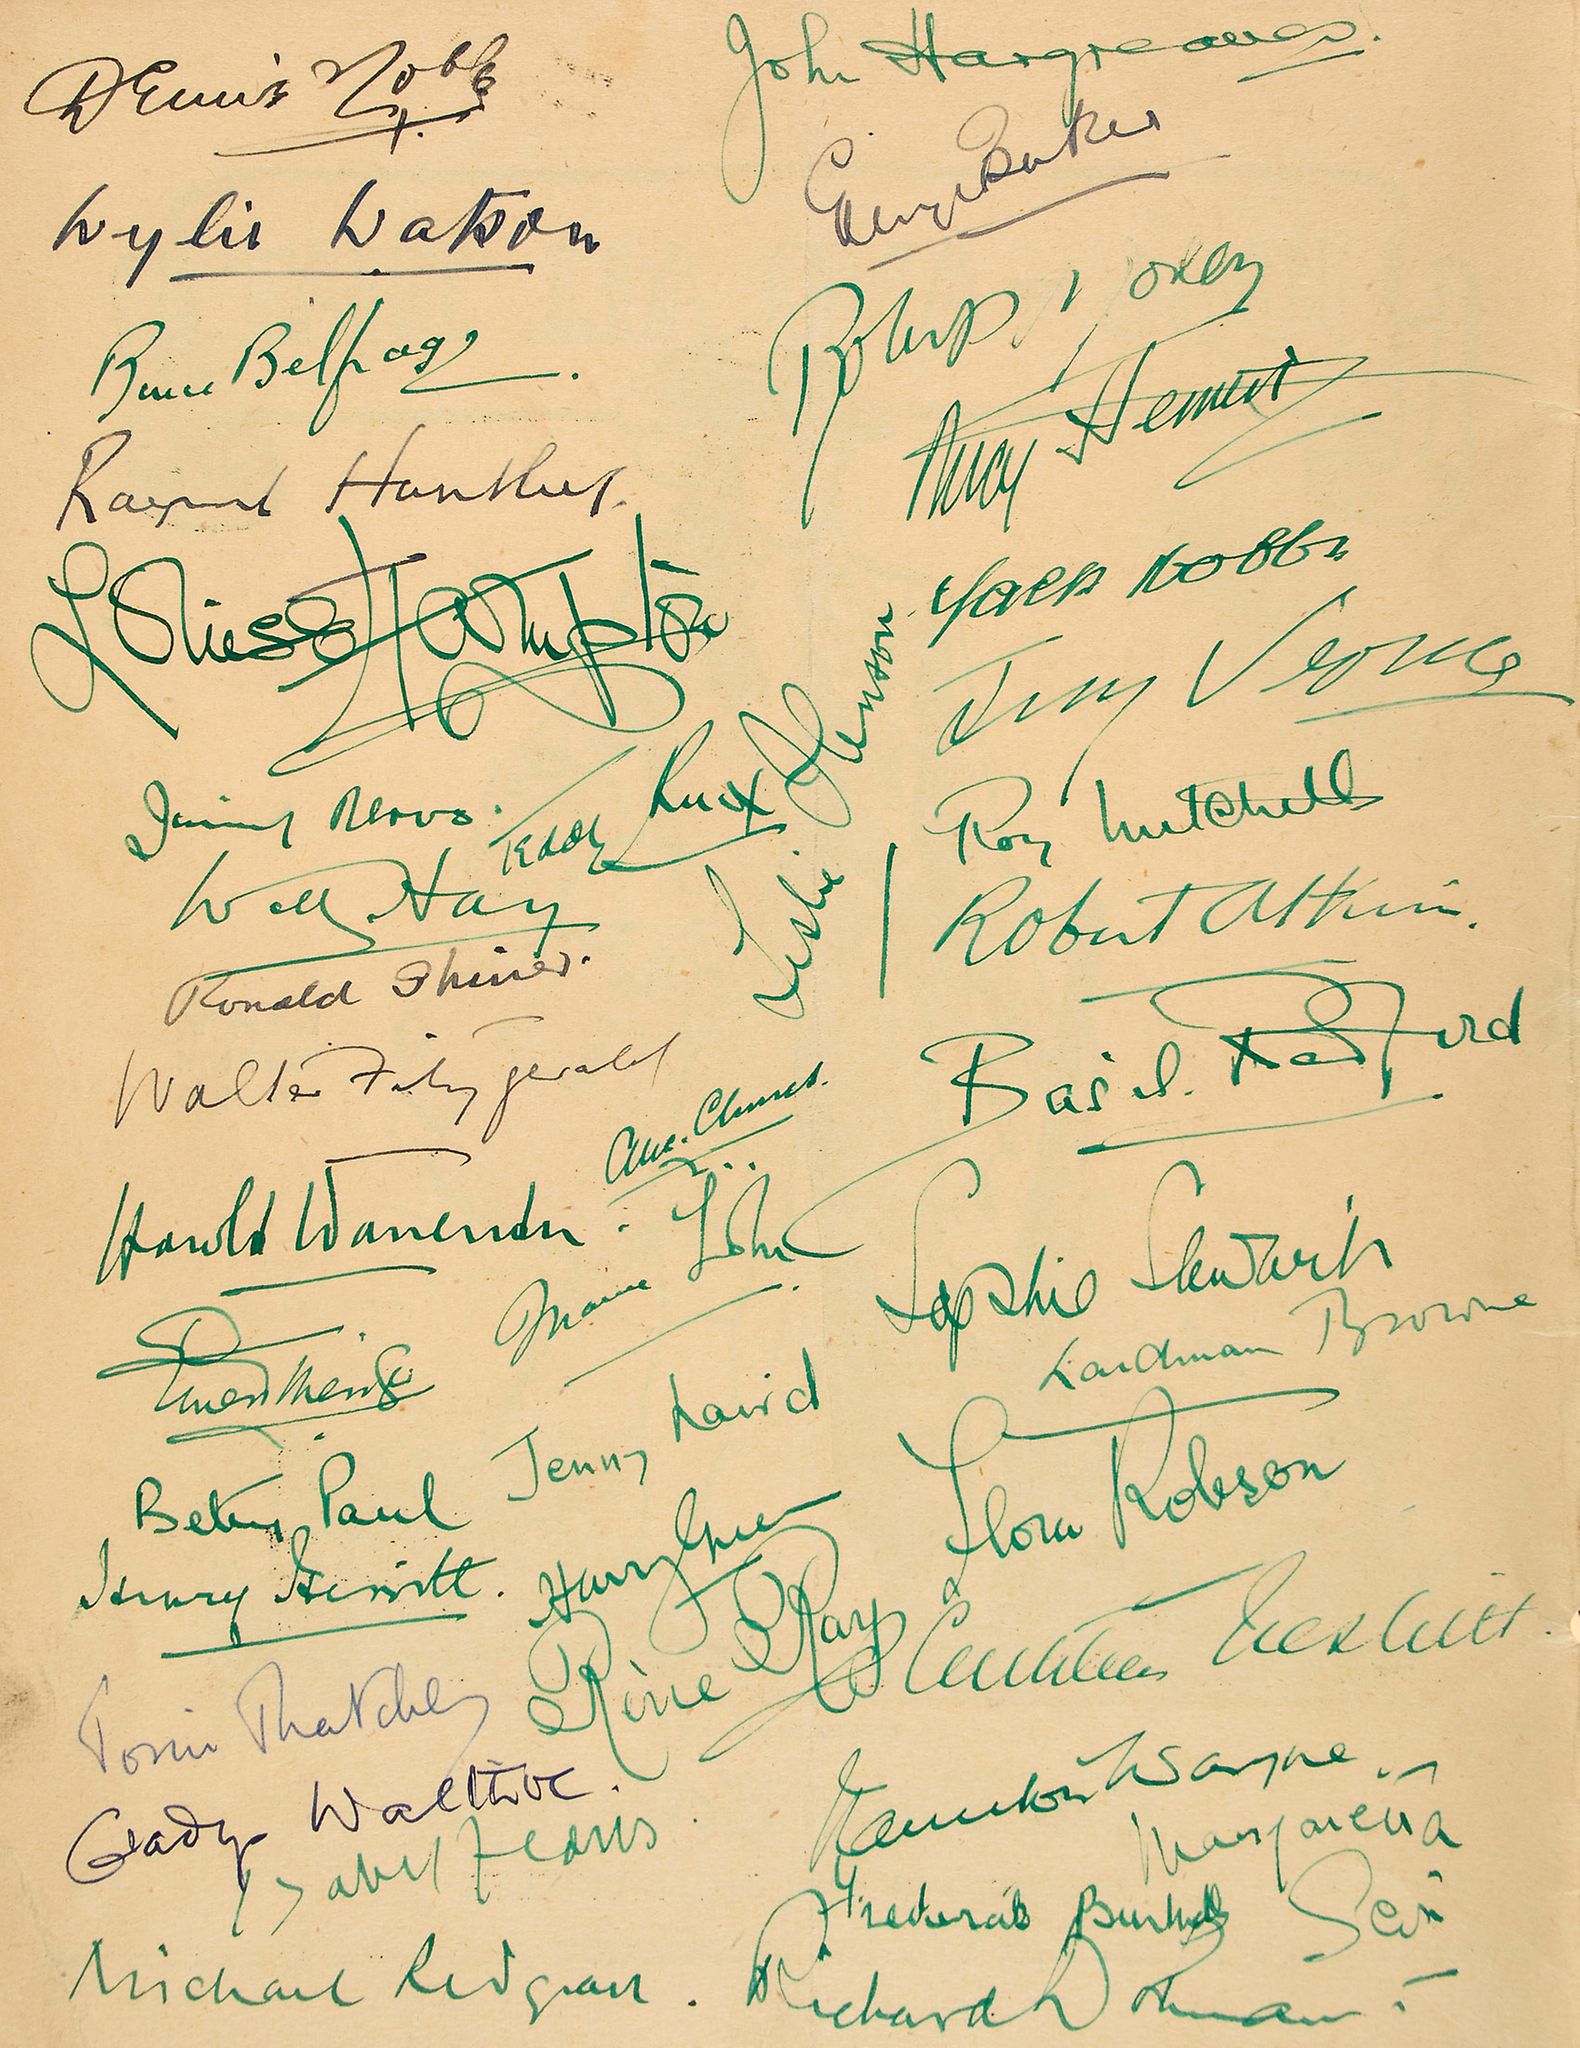 SIGNED THEATRE PROGRAMME - Theatre programme of the 1946 Palace Theatre production of 66 -...